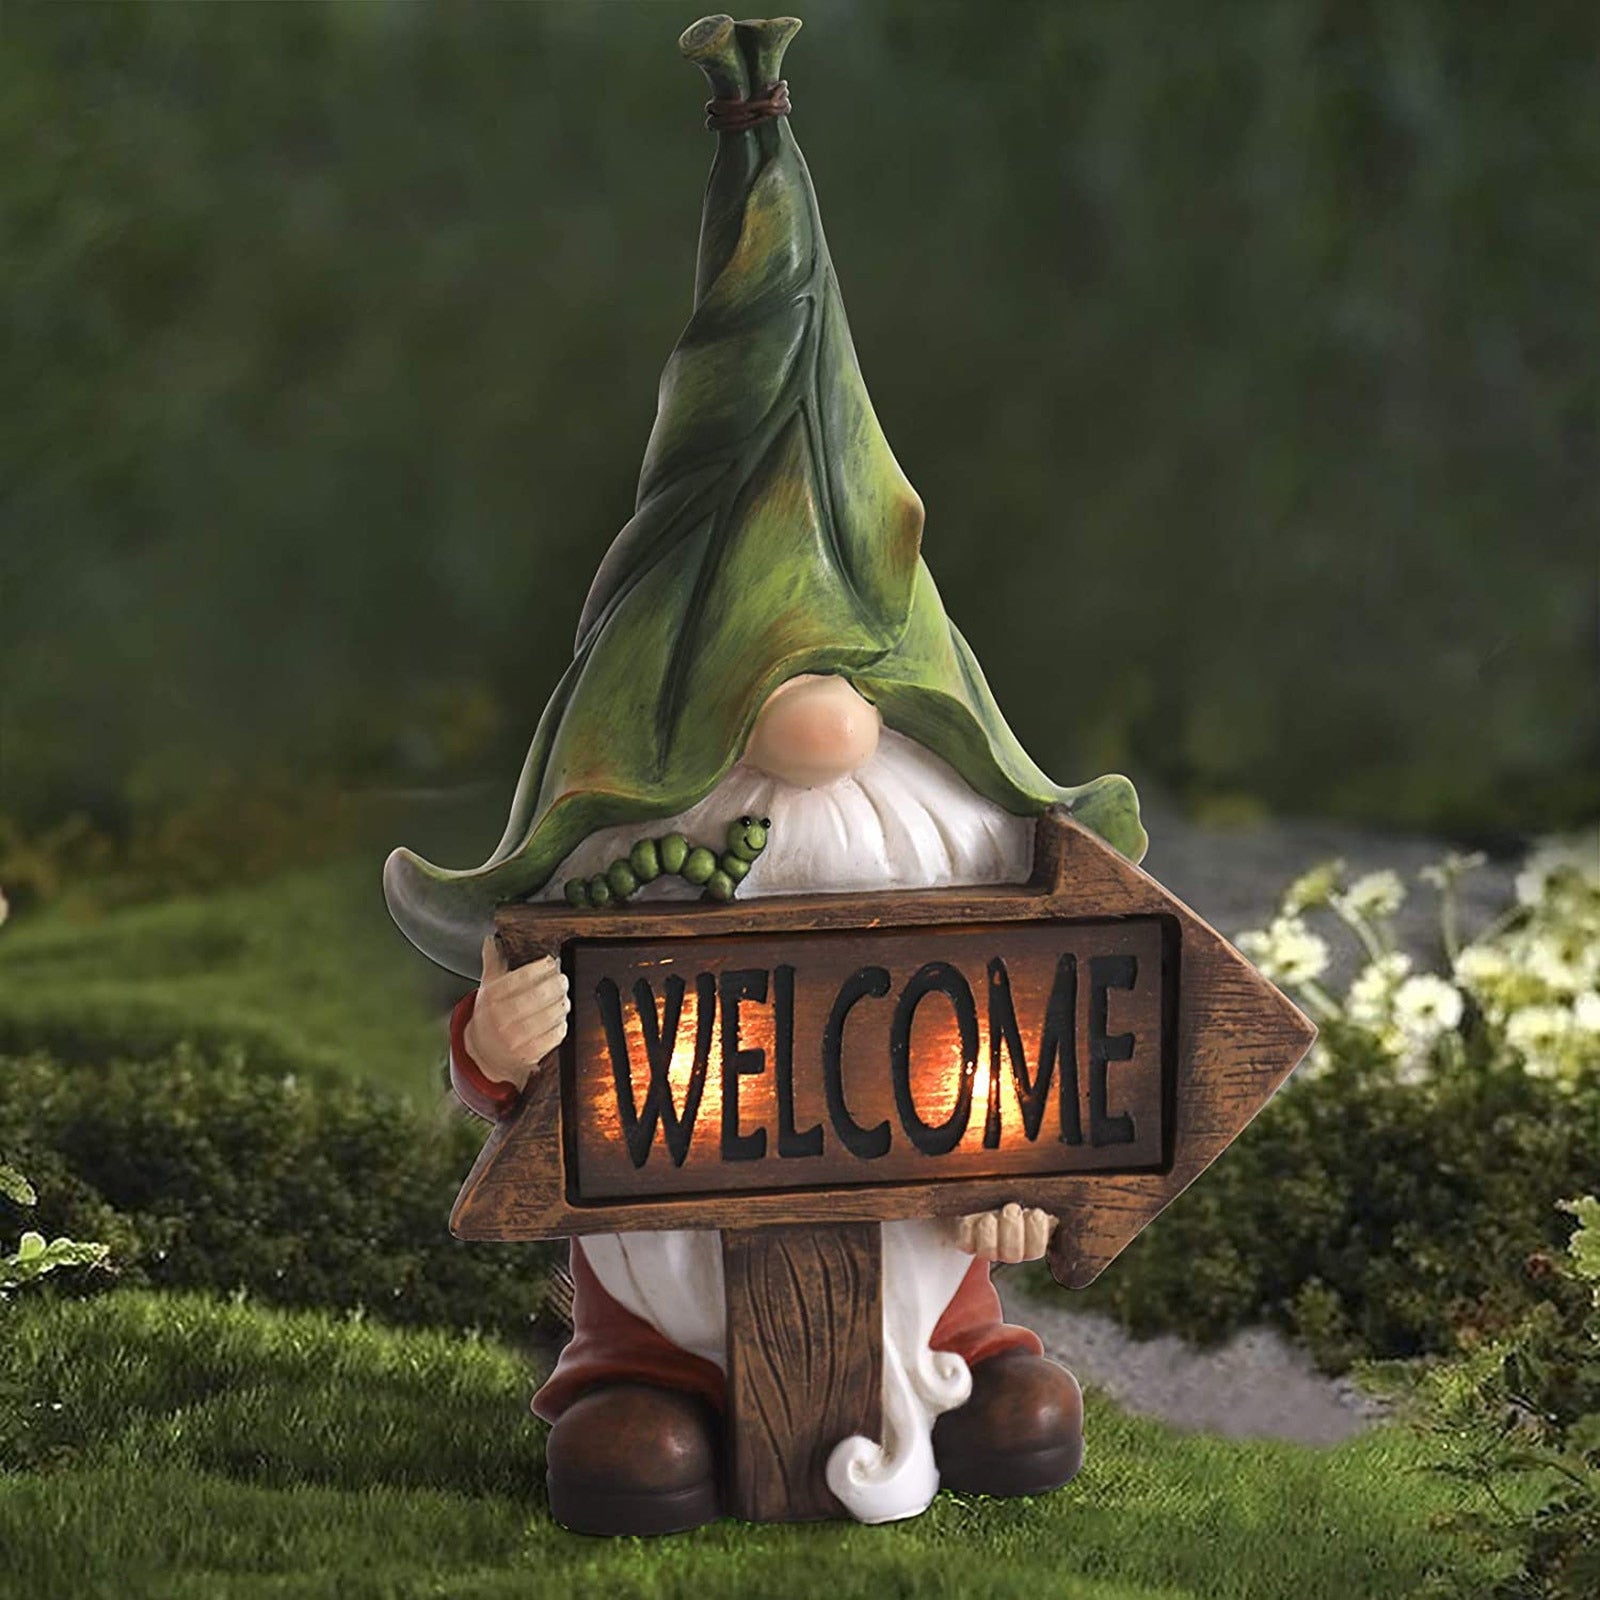 A Outdoor Garden Dwarf Statue-resin Dwarf Statue Carrying Magic Ball Solar Led Light Welcome Sign Gnome Yard Lawn Large Figurine